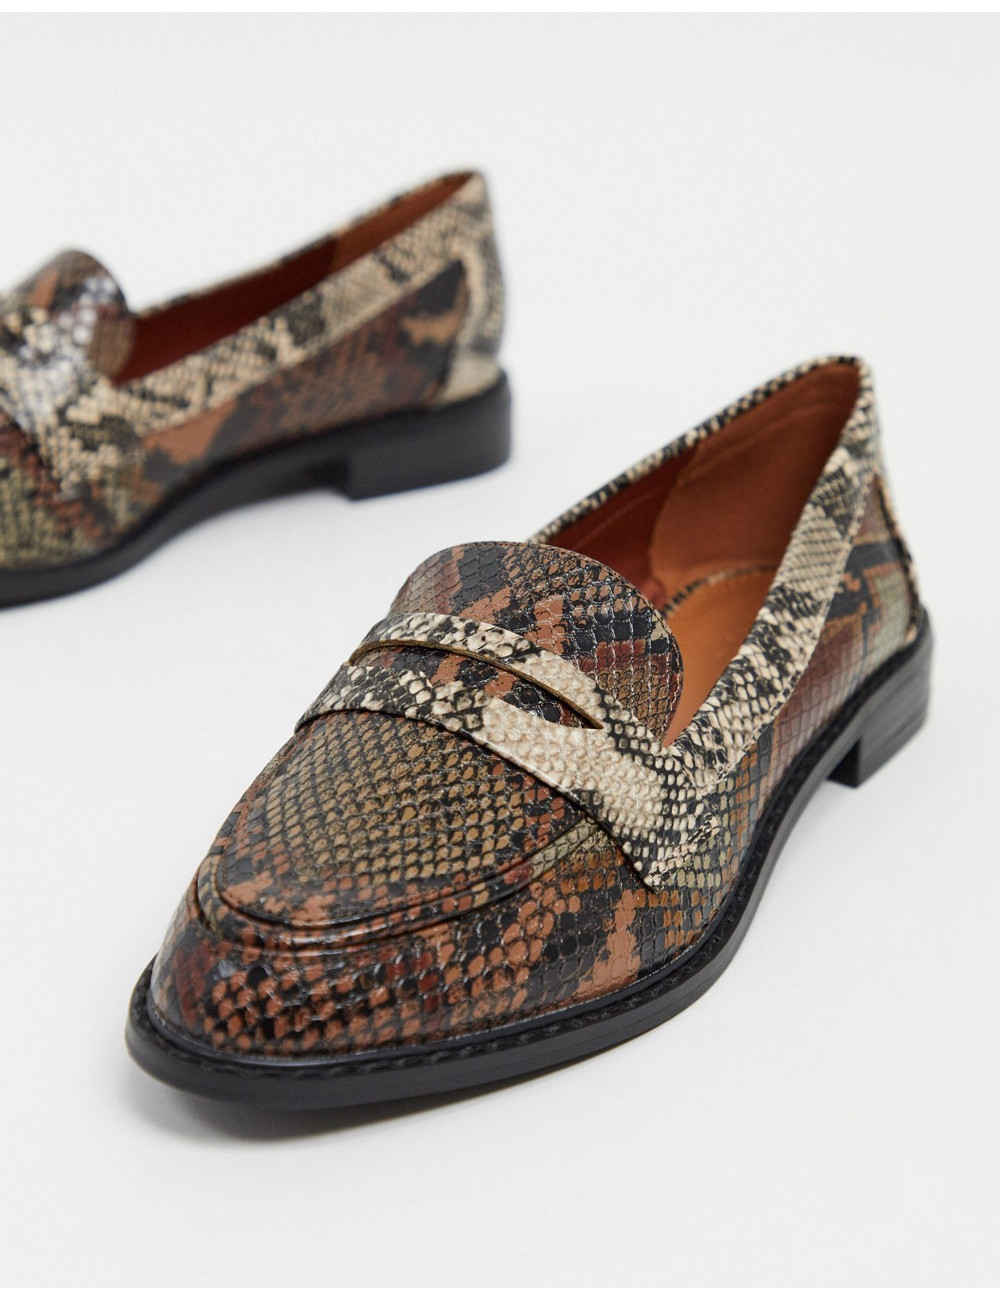 ASOS DESIGN Mail loafers in...